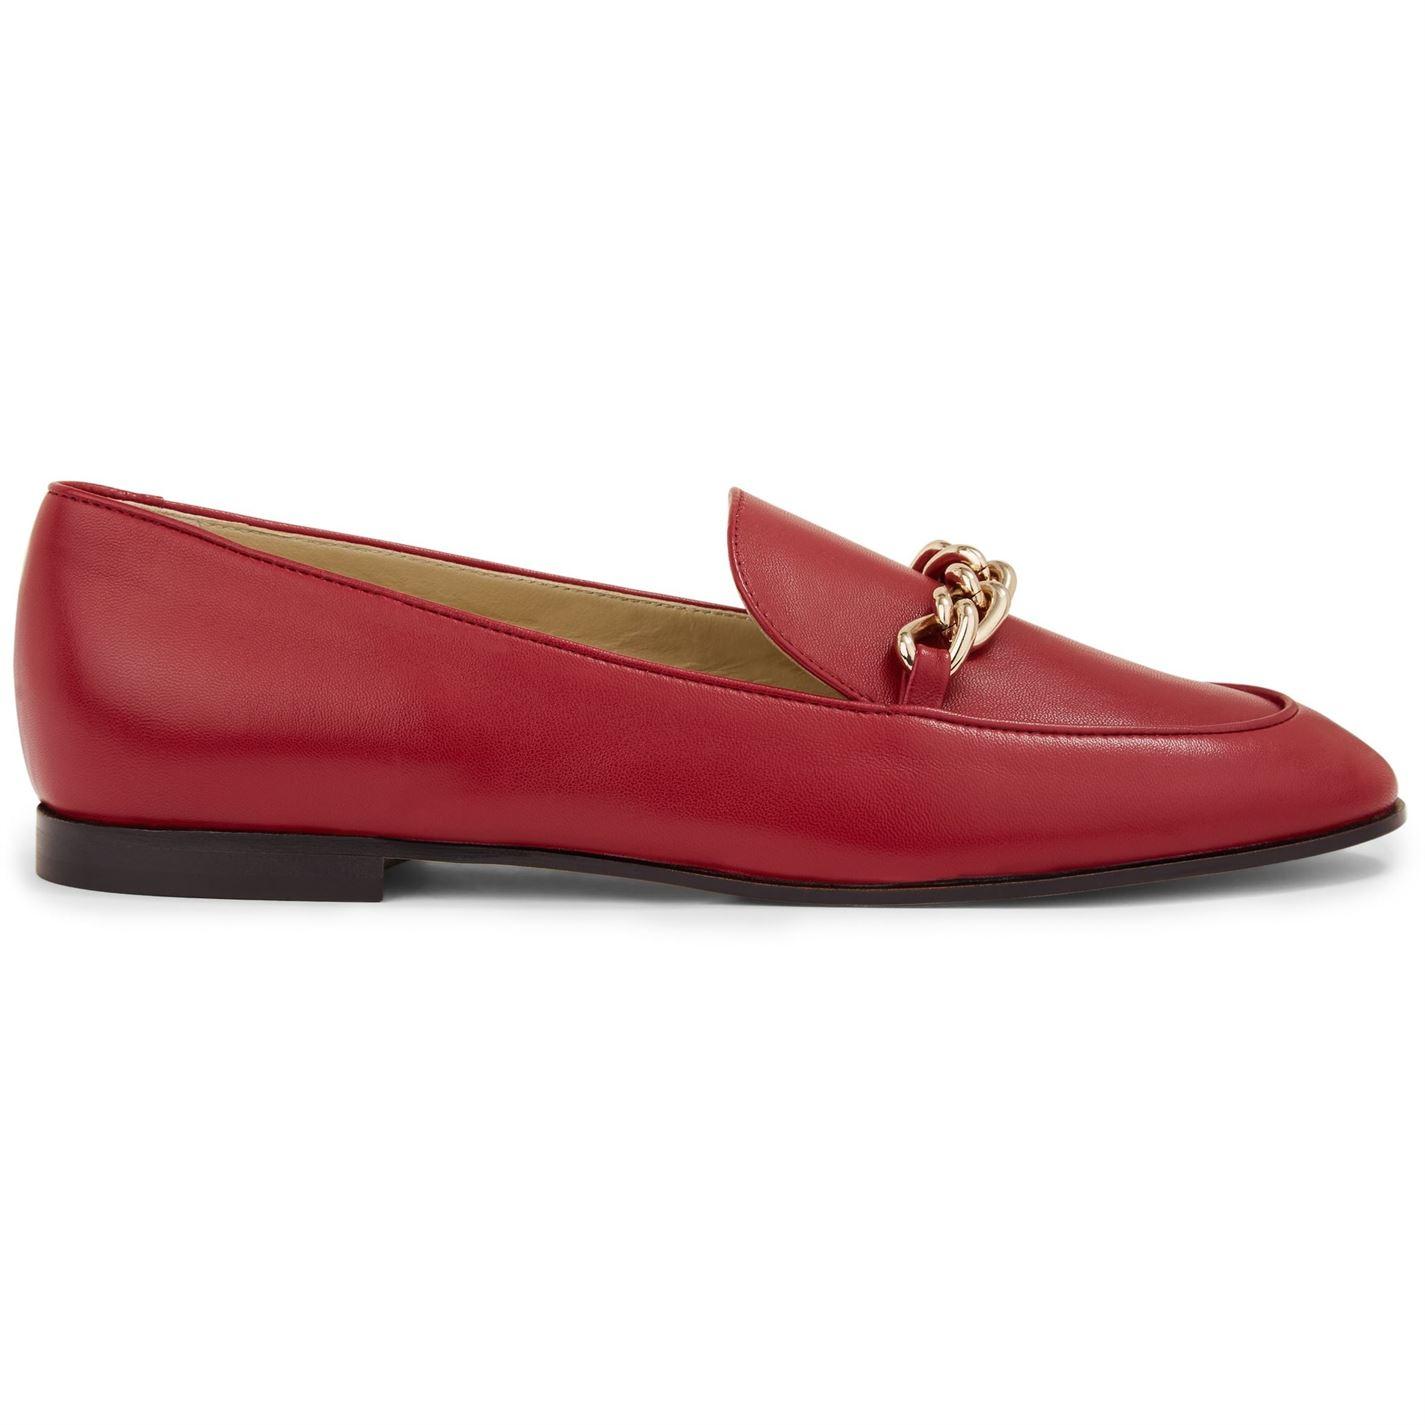 Hobbs Leather Hannah Loafer in Red - Lyst